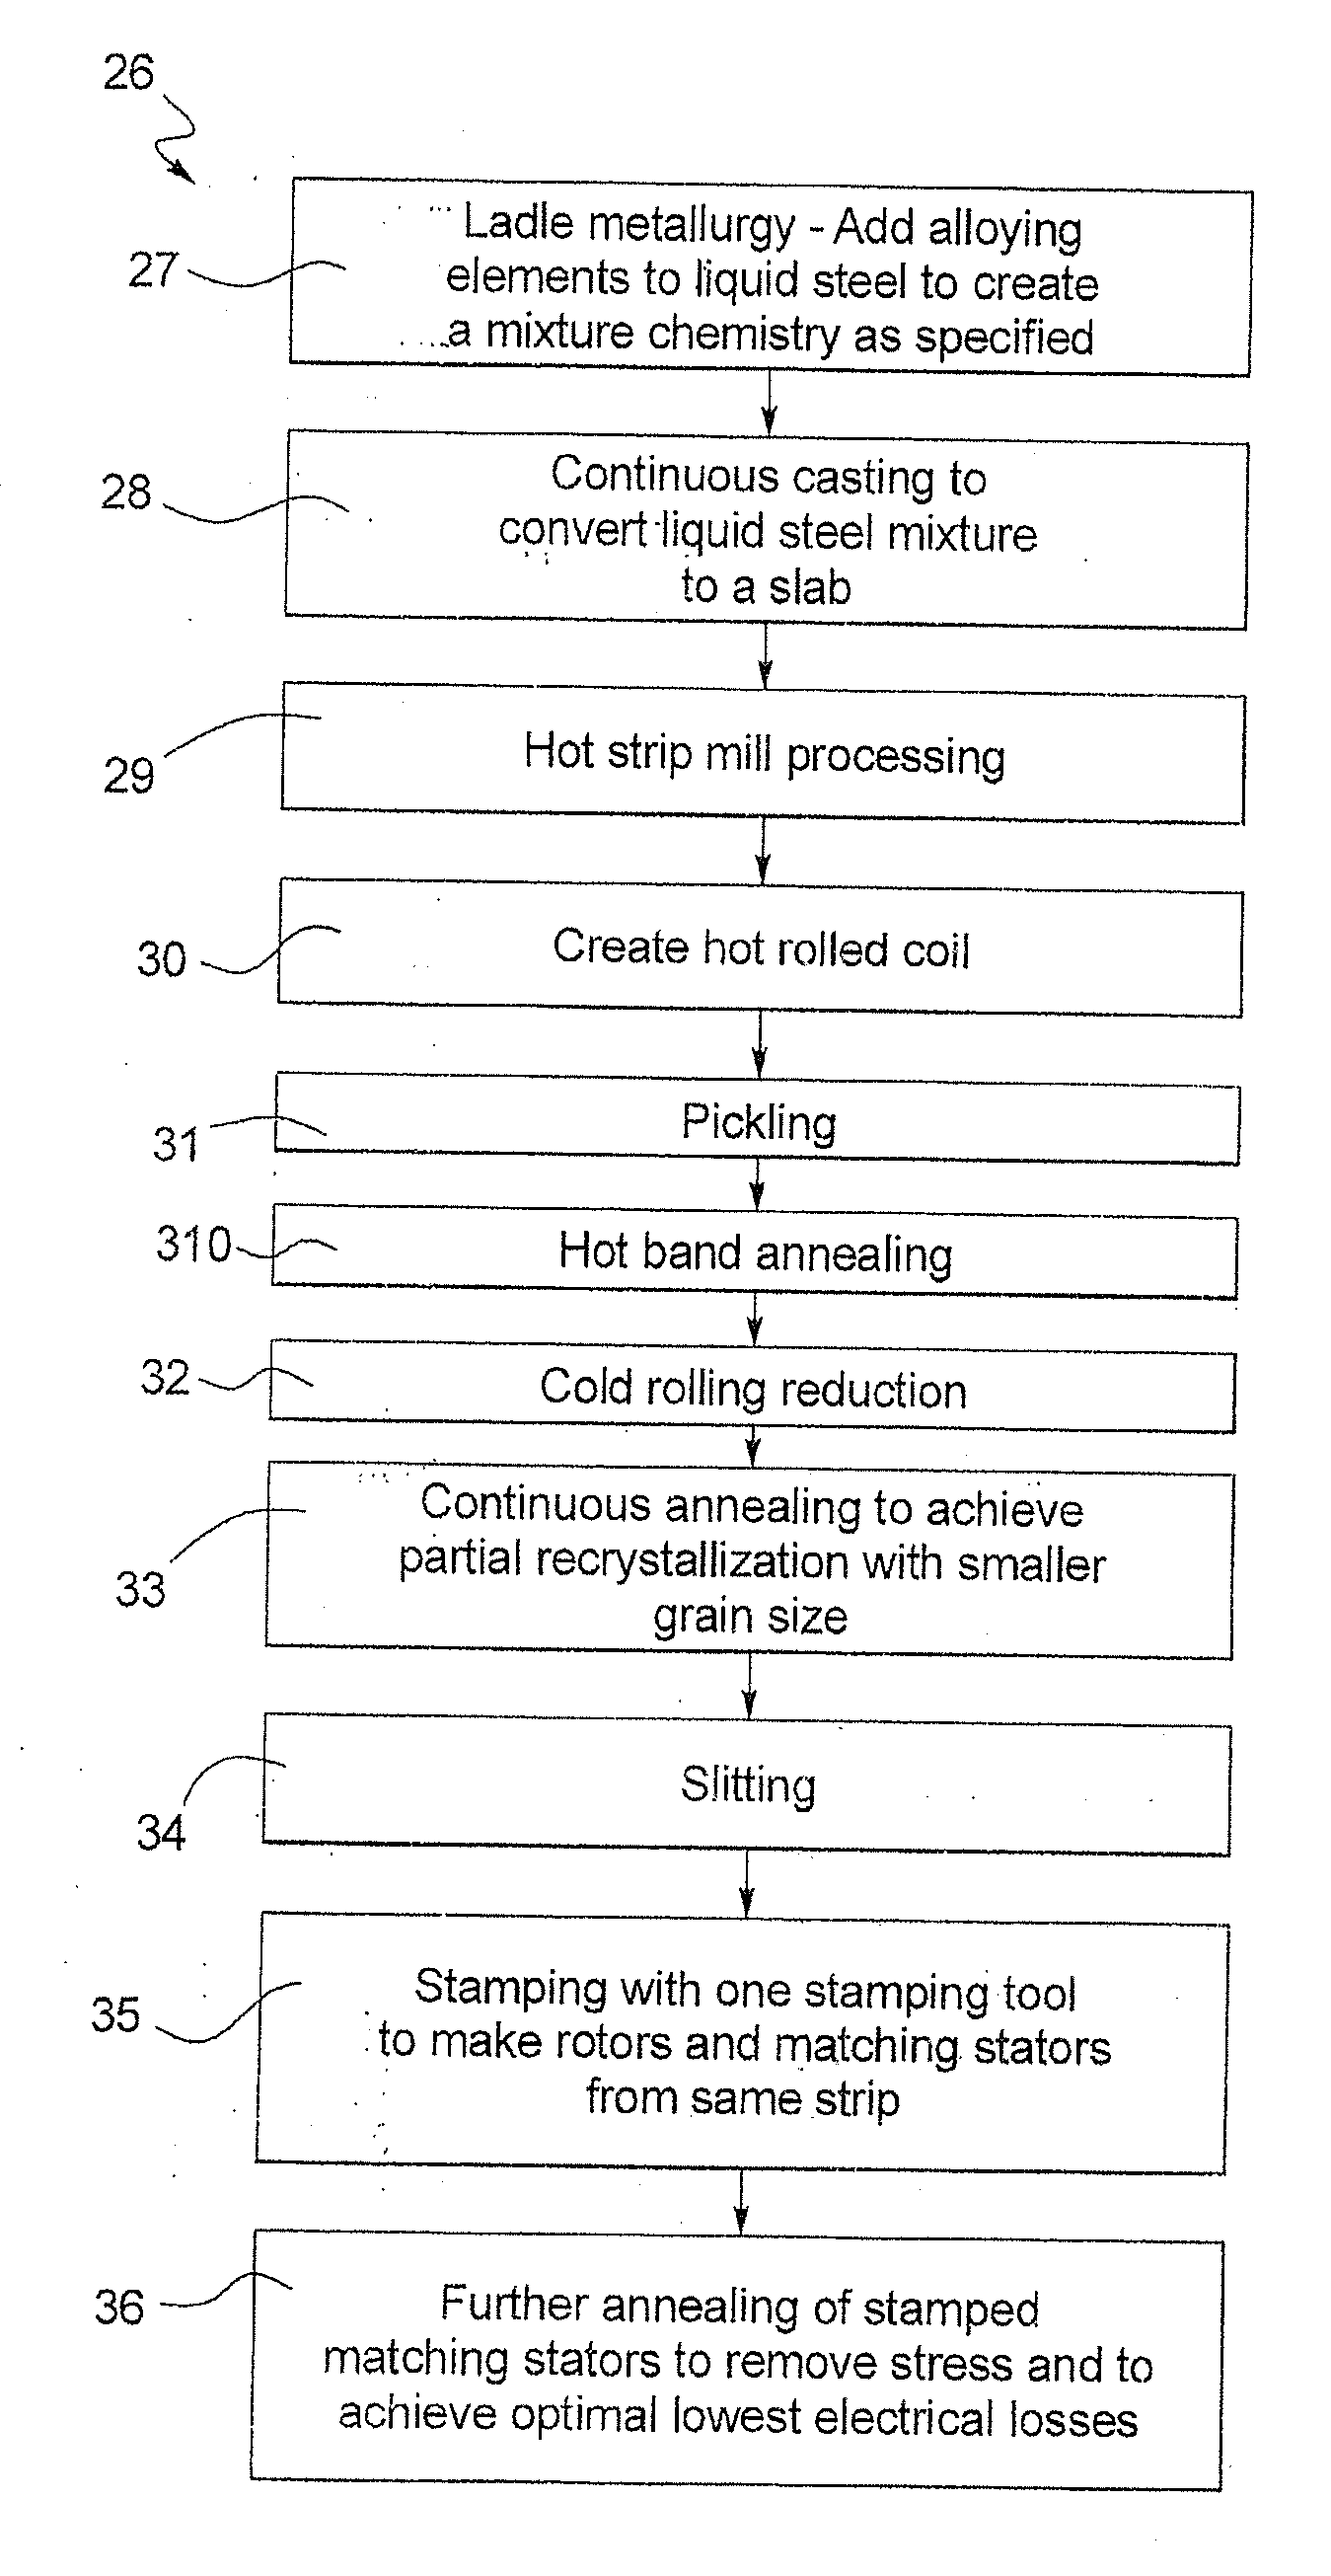 Electrical steel, a motor, and a method for manufacture of electrical steel with high strength and low electrical losses